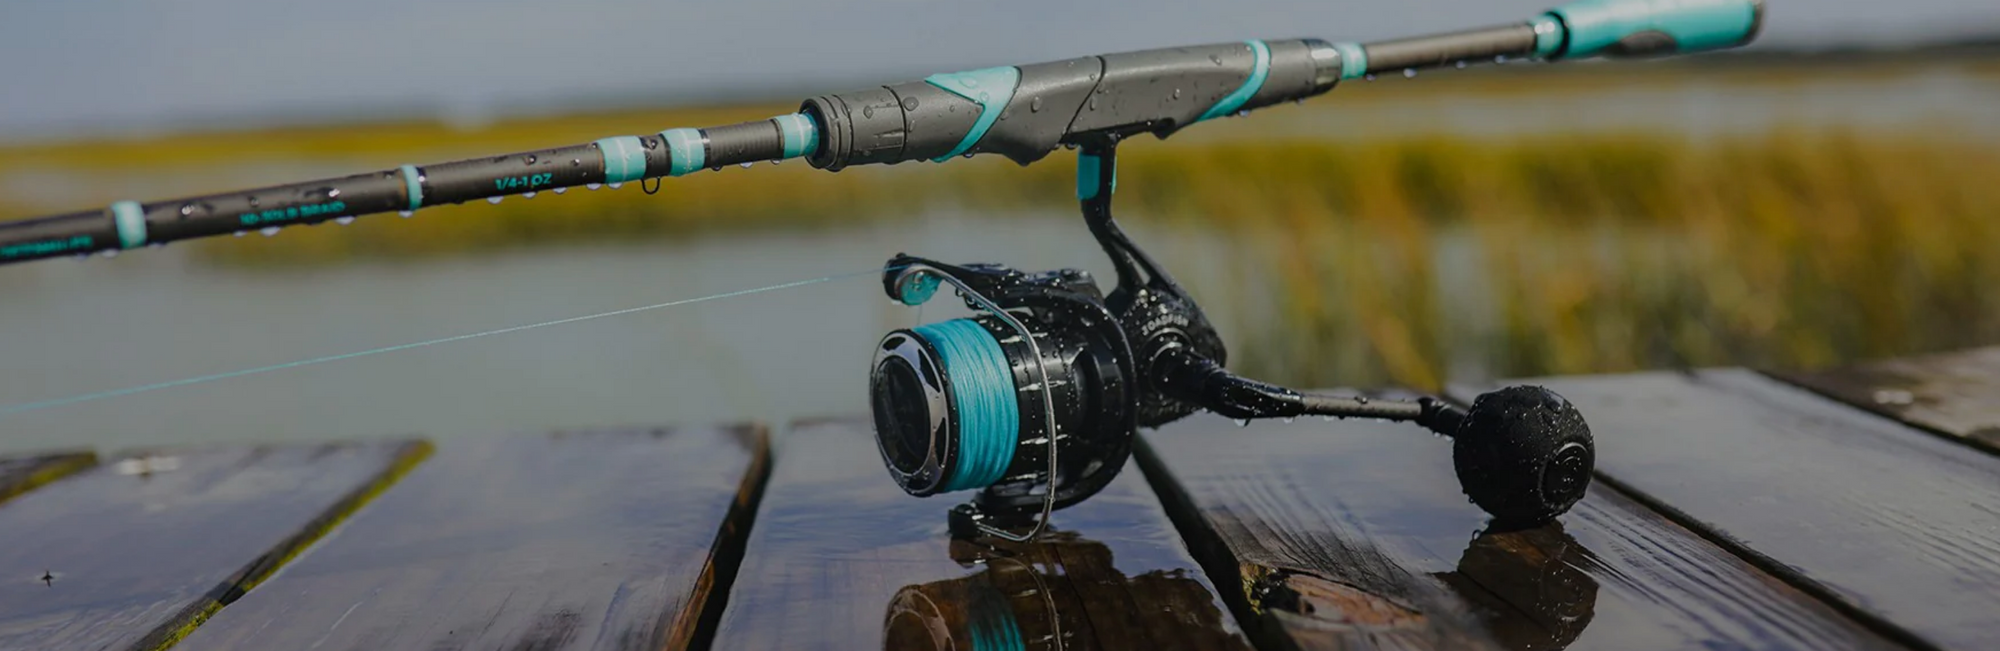 The Fishing Rod That Gives BACK - Toadfish Review 